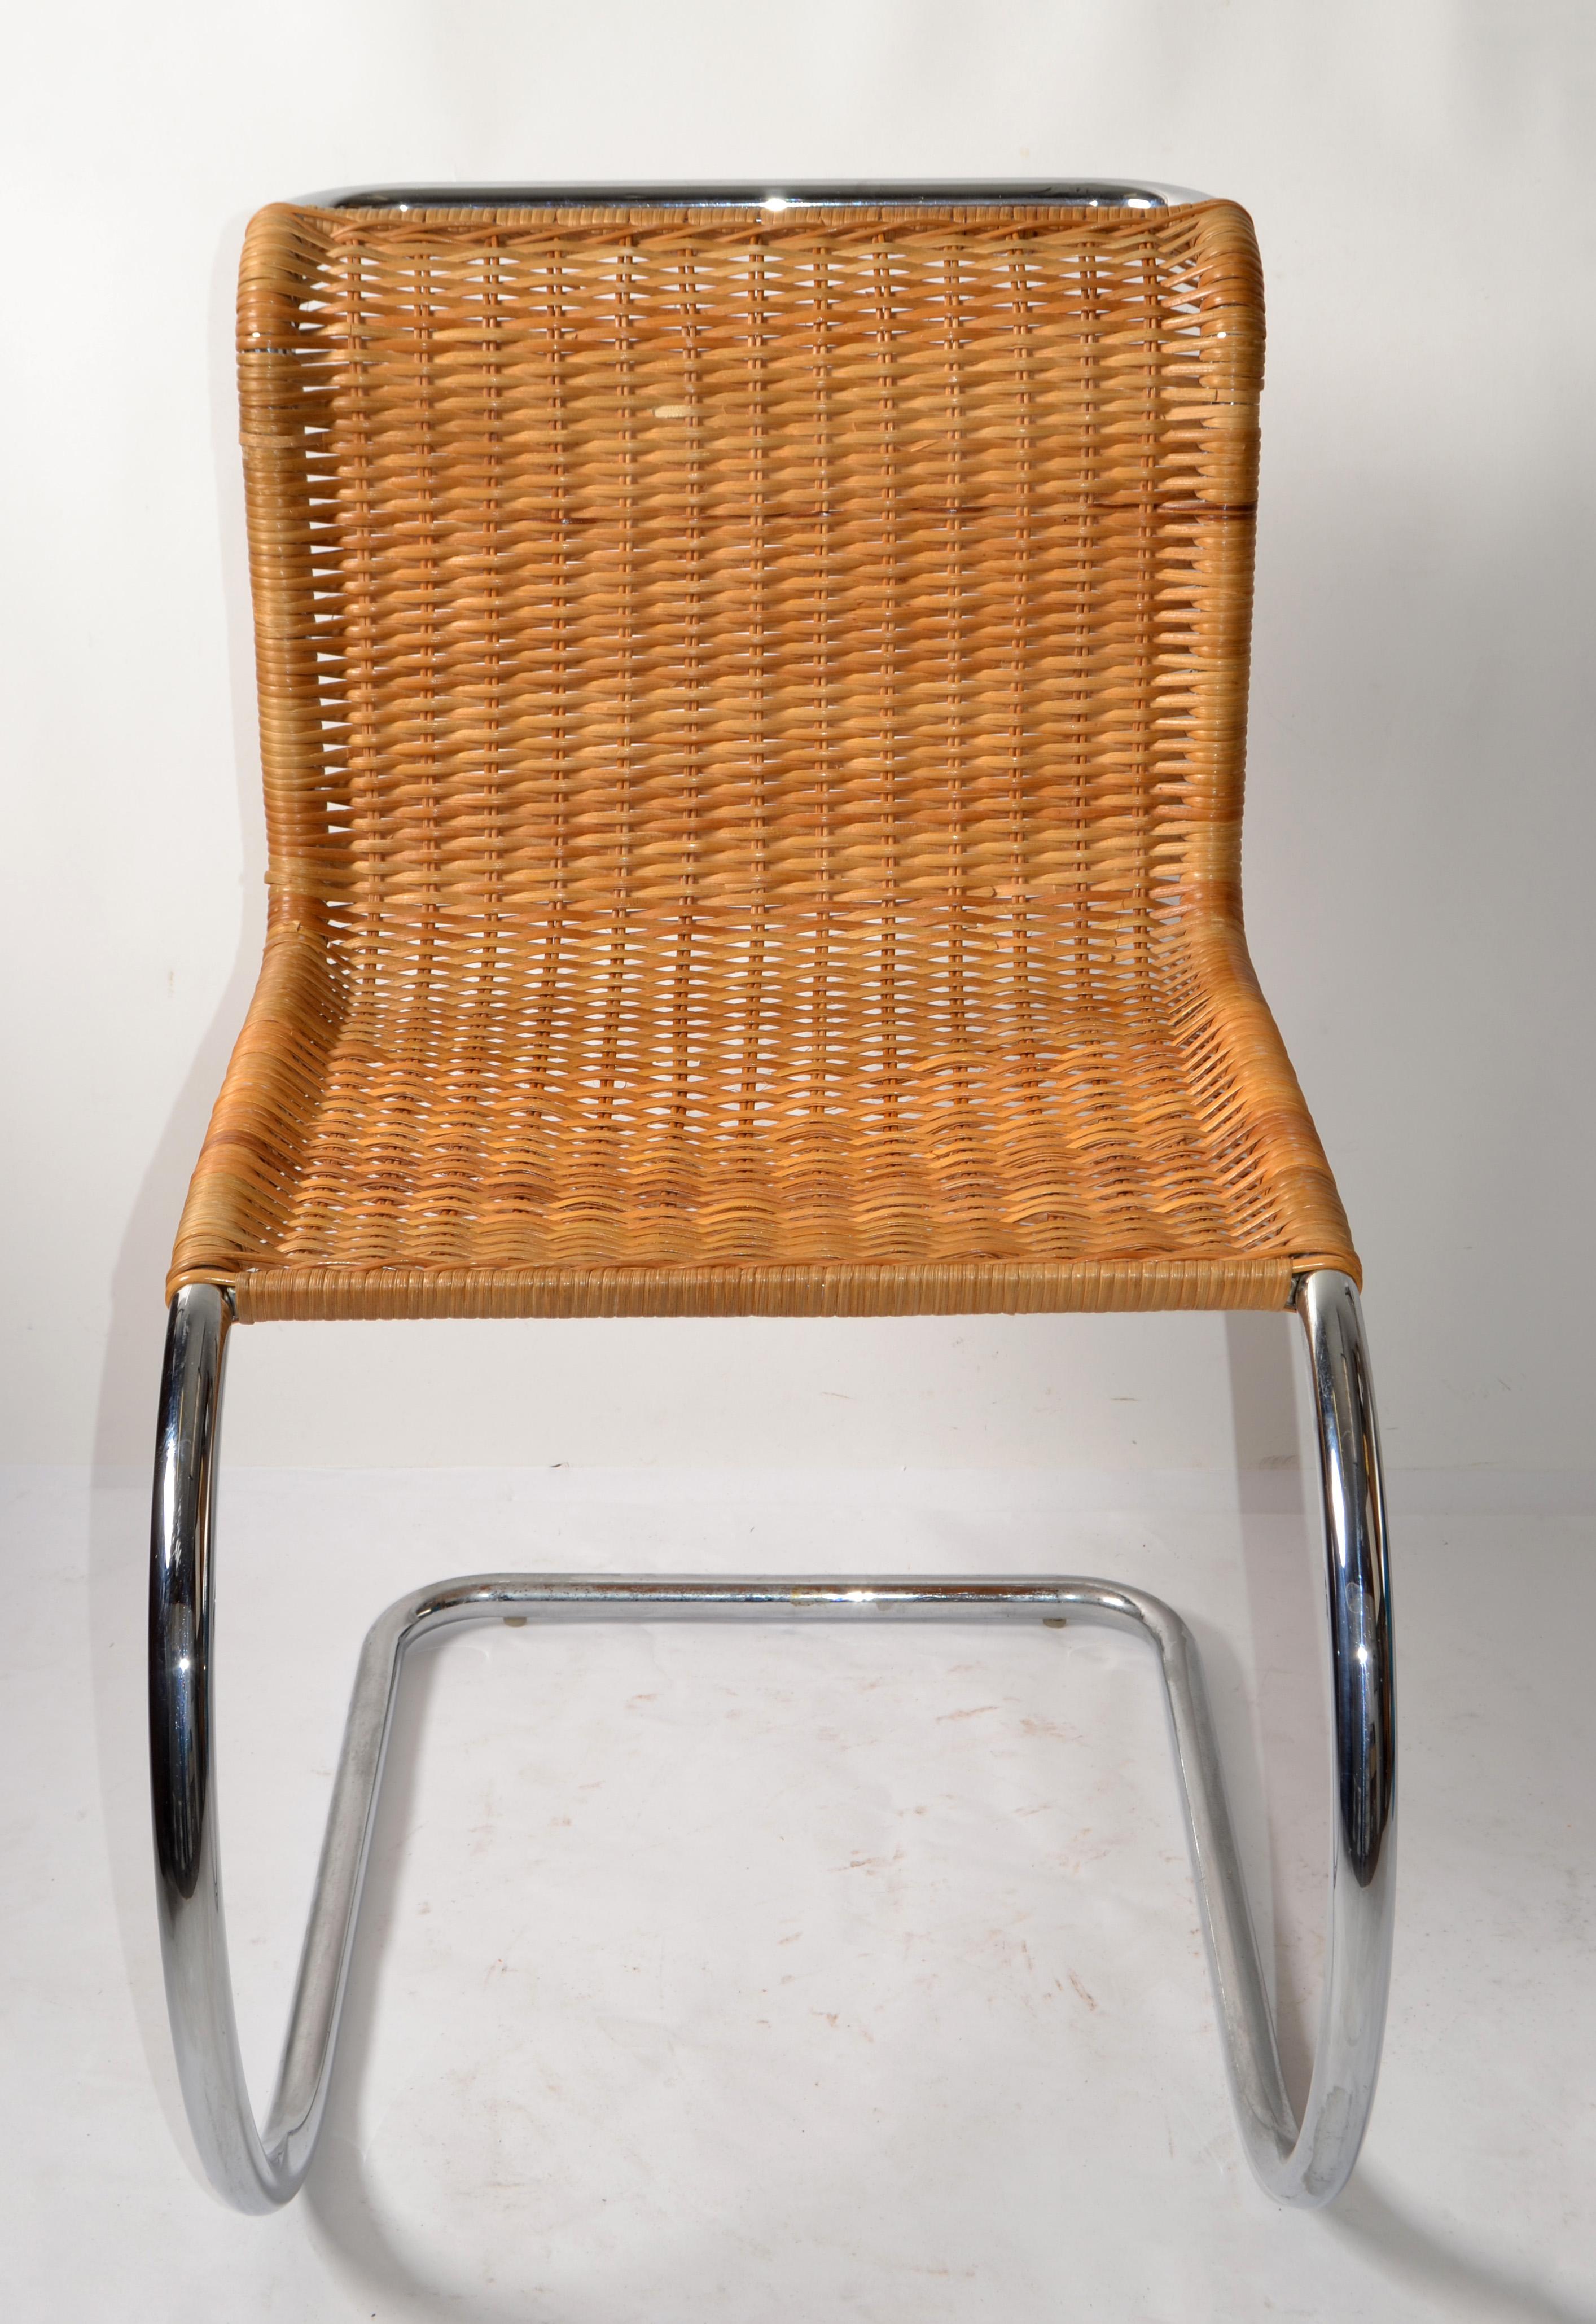 Mid-Century Modern Tubular Ludwig Mies van der Rohe Attributed Mr Chair Armless Woven Cane Seat 70s For Sale